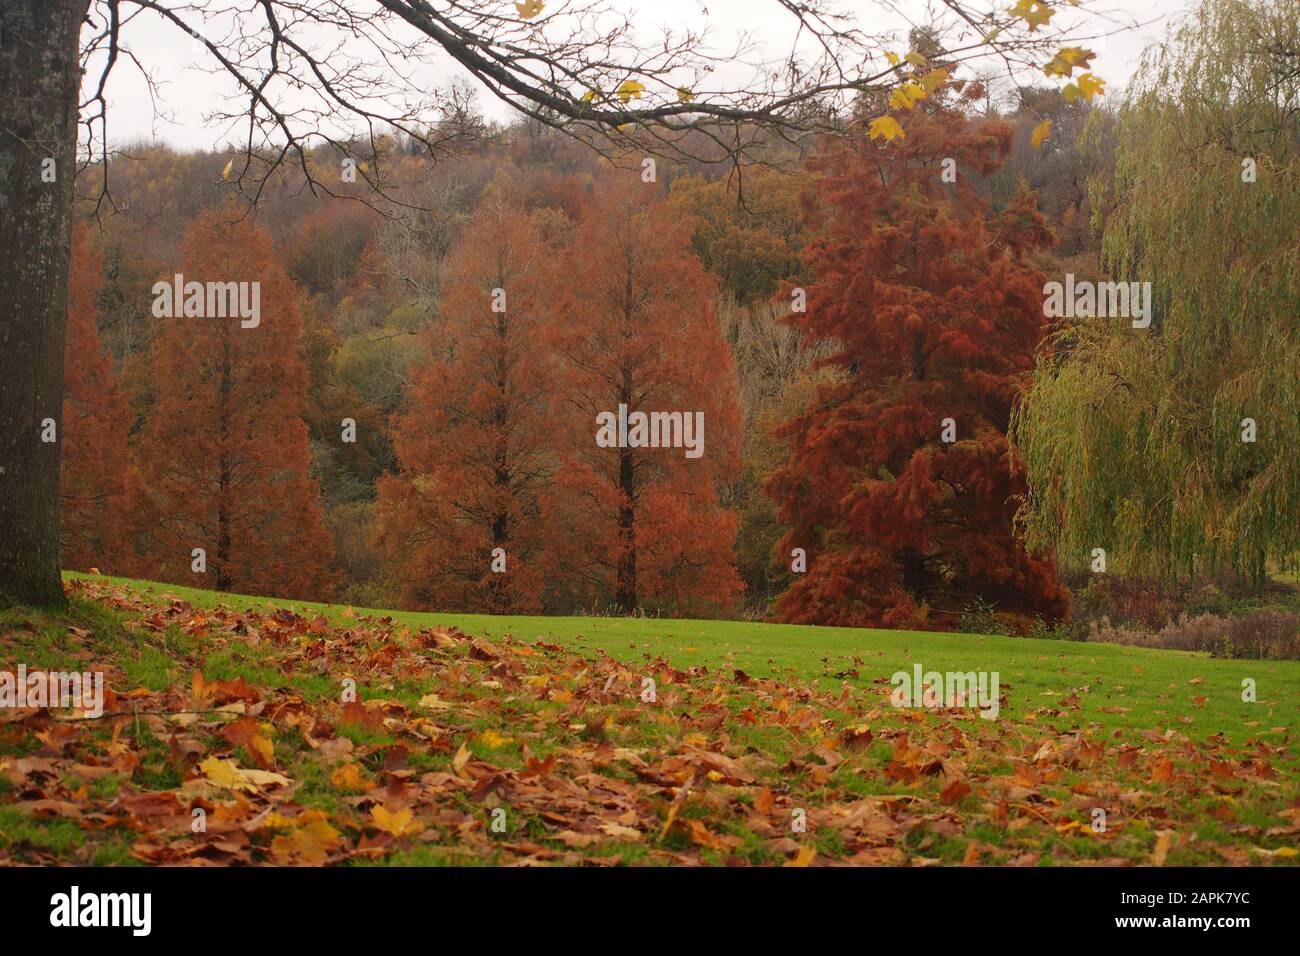 A view across an autumn garden across a lawn with fallen autumn leaves with trees beyond in their autumn colours Stock Photo